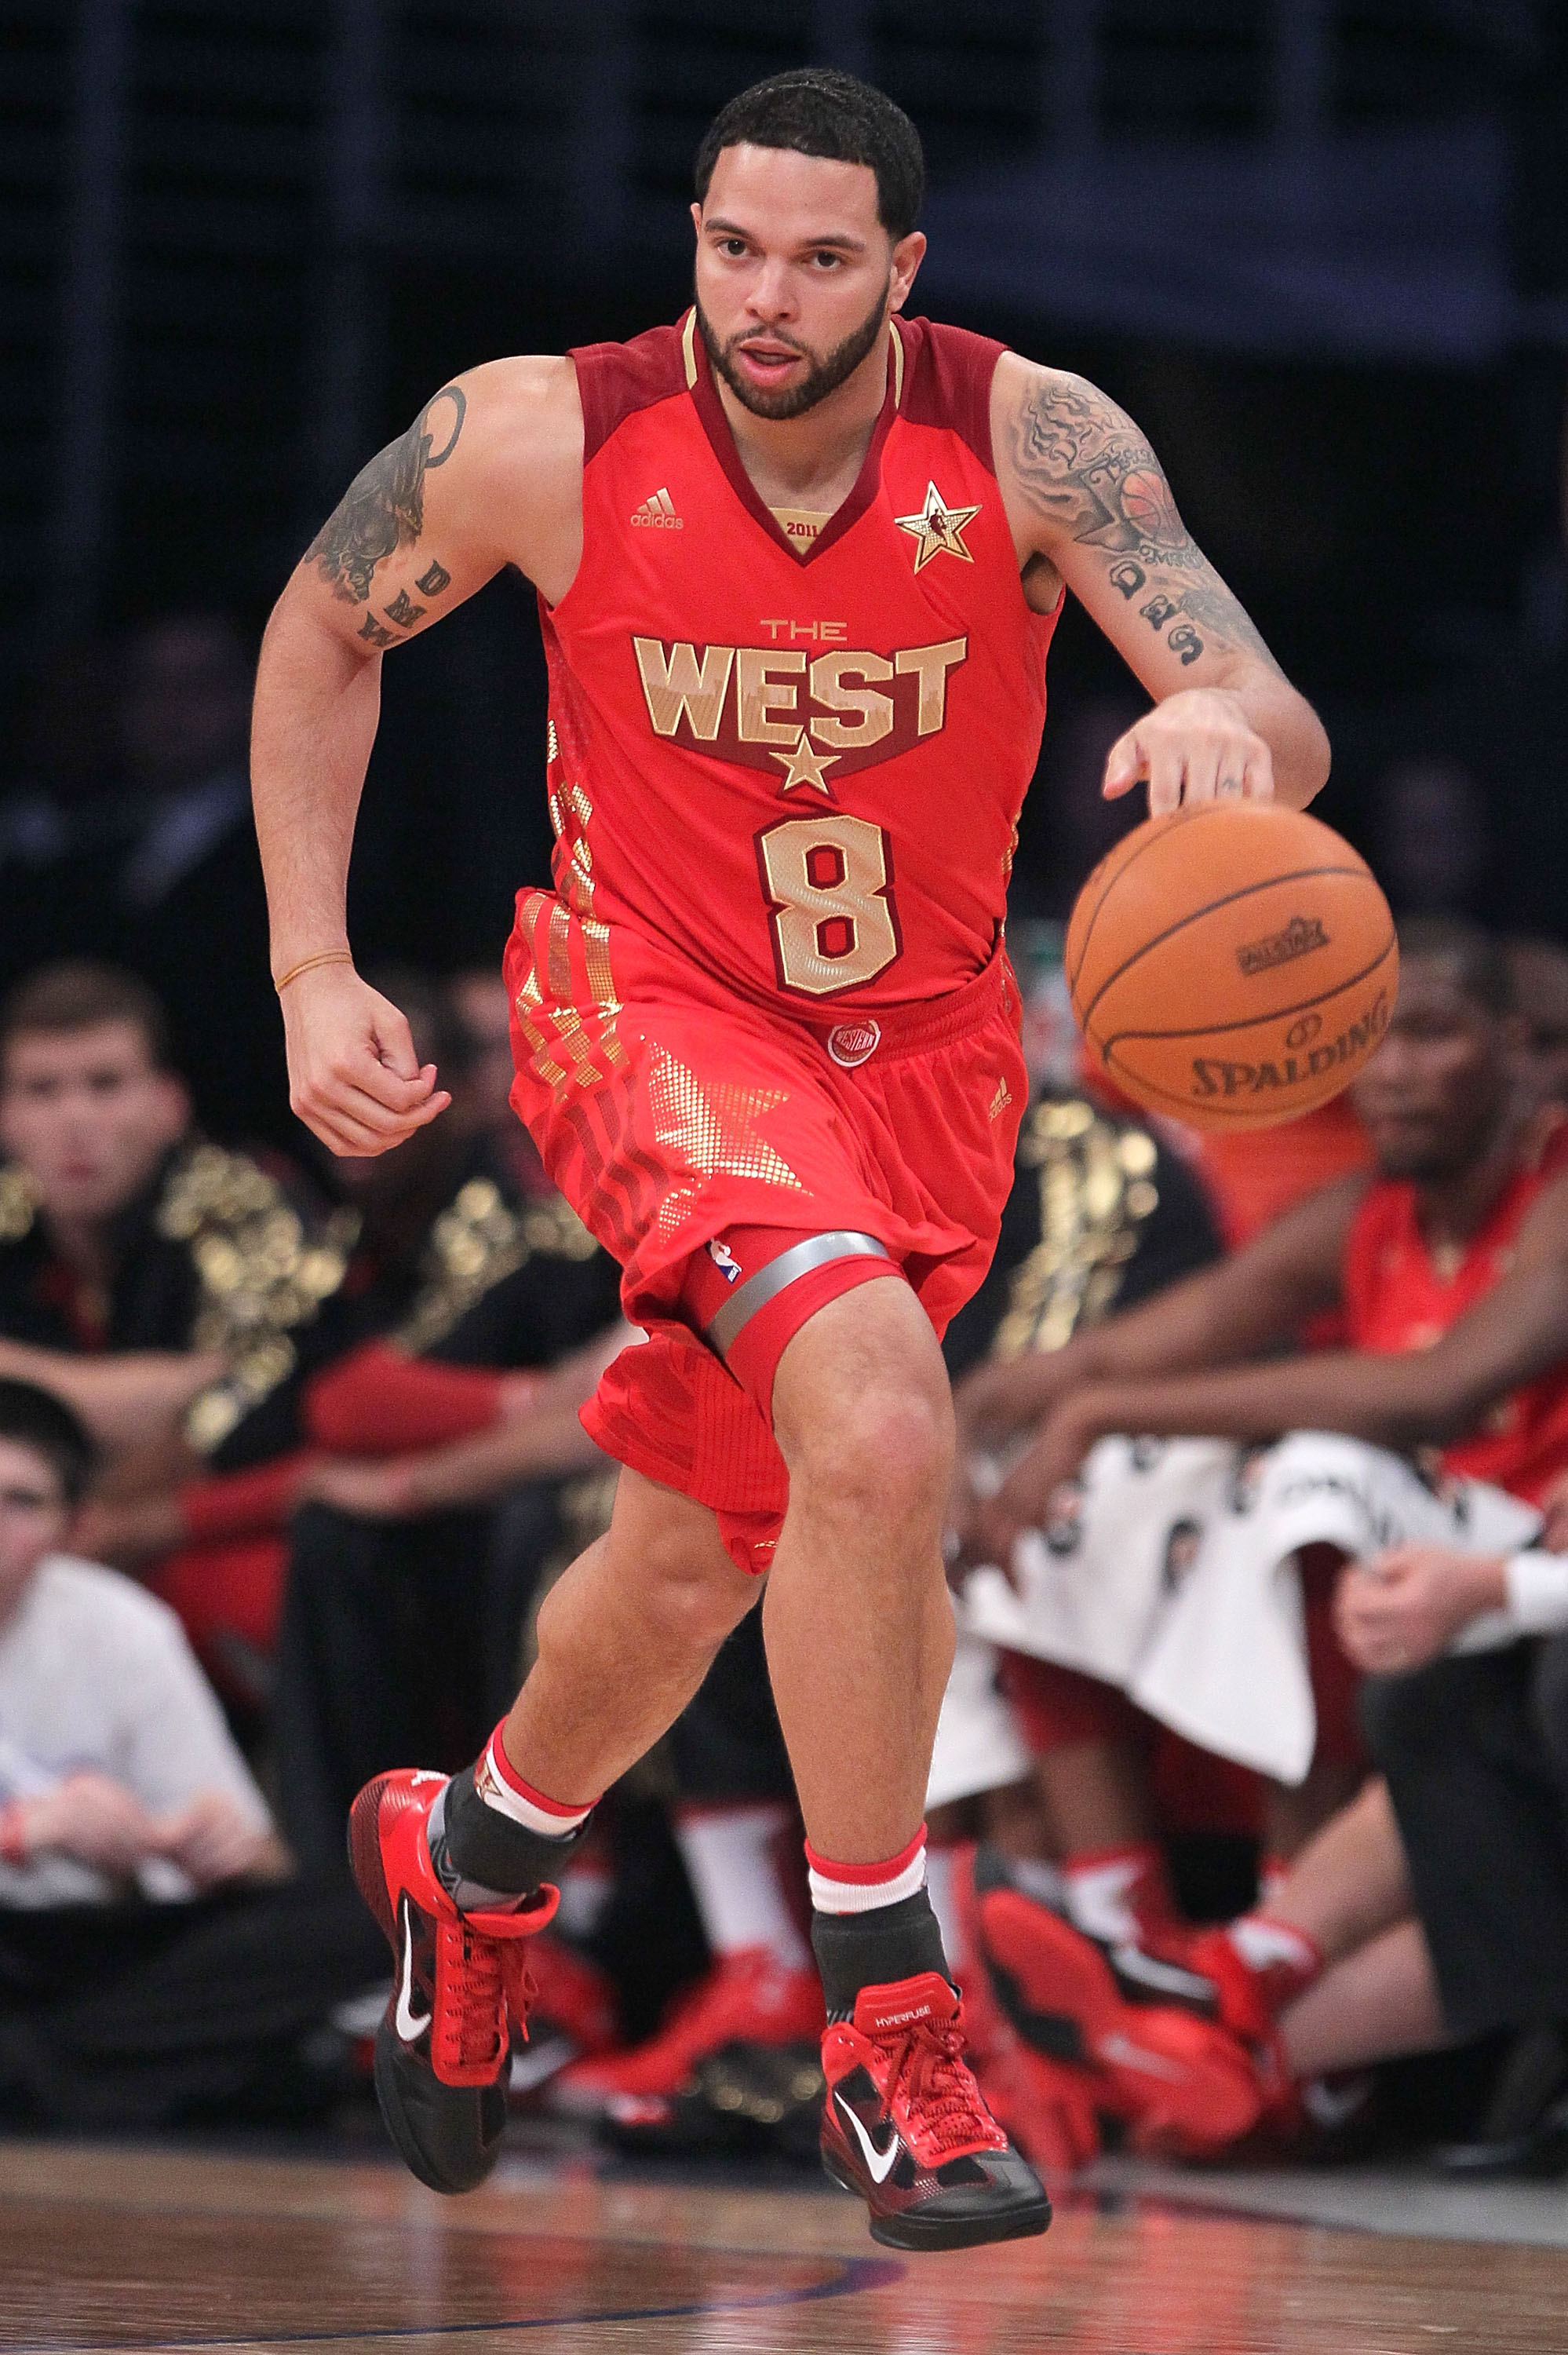 LOS ANGELES, CA - FEBRUARY 20:  Deron Williams #8 of the Utah Jazz and the Western Conference moves the ball in the 2011 NBA All-Star Game at Staples Center on February 20, 2011 in Los Angeles, California. NOTE TO USER: User expressly acknowledges and agr